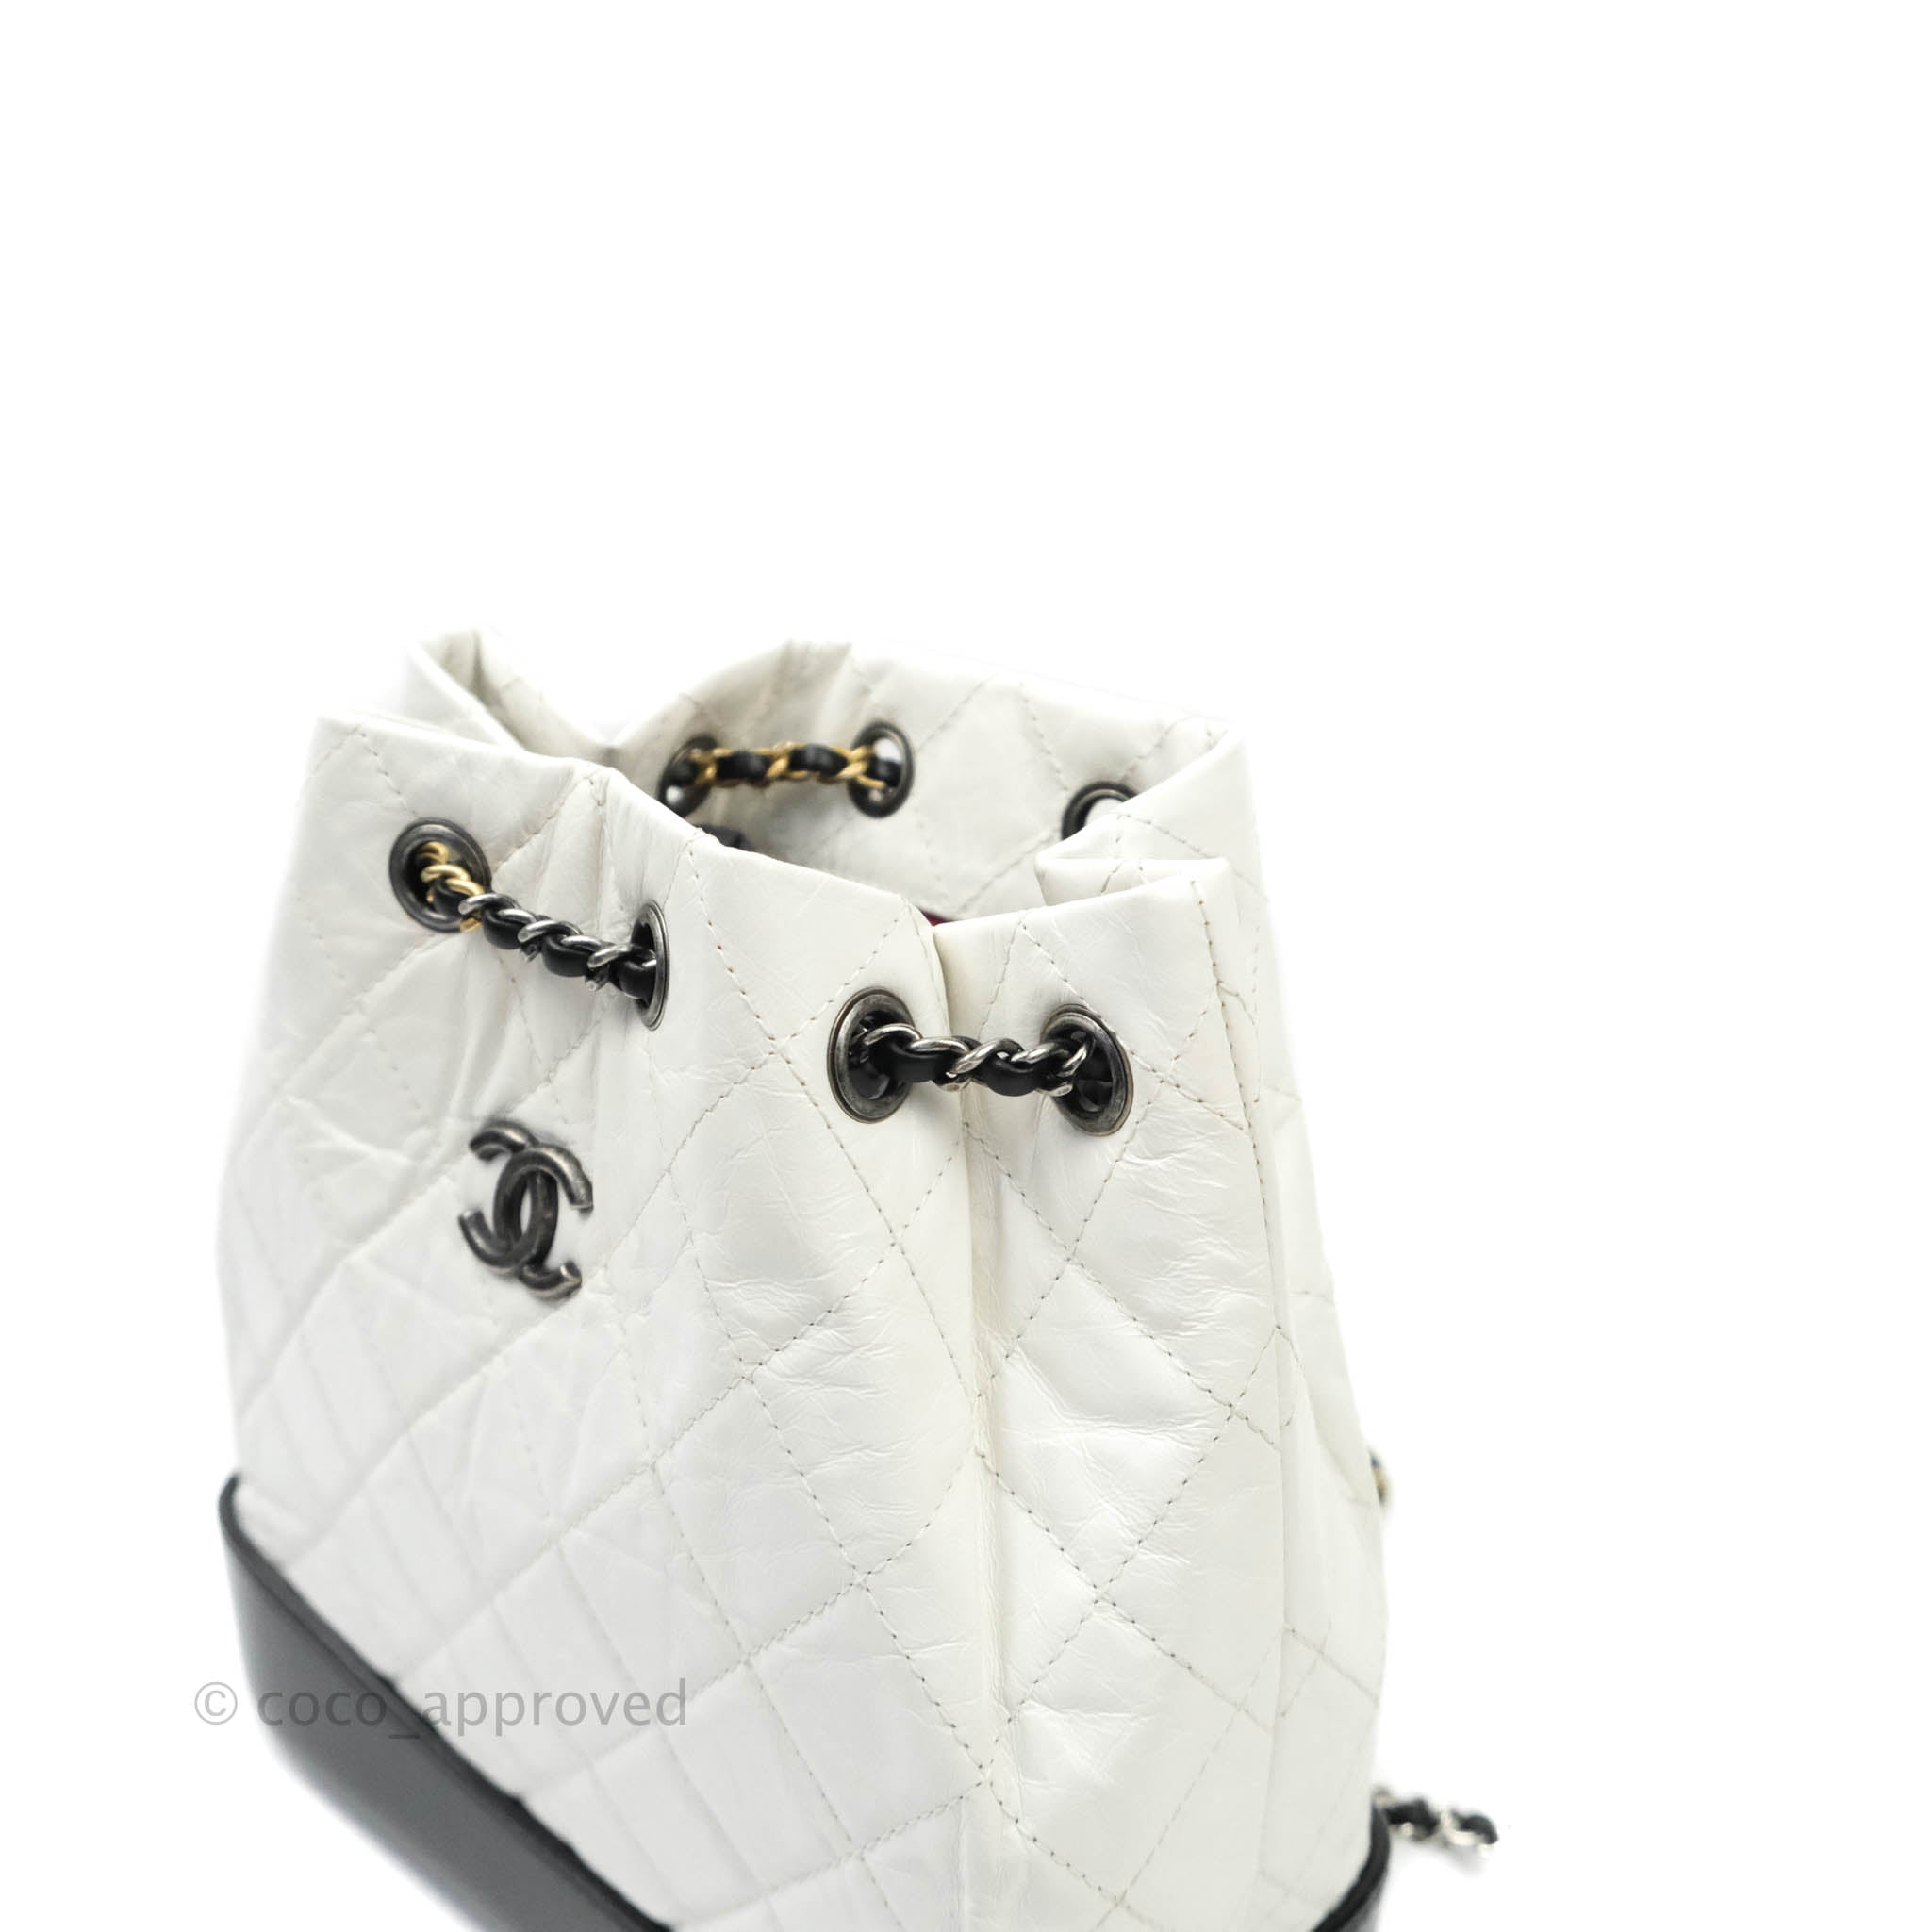 Chanel Gabrielle Backpack White Calfskin Black Base⁣ – Coco Approved Studio